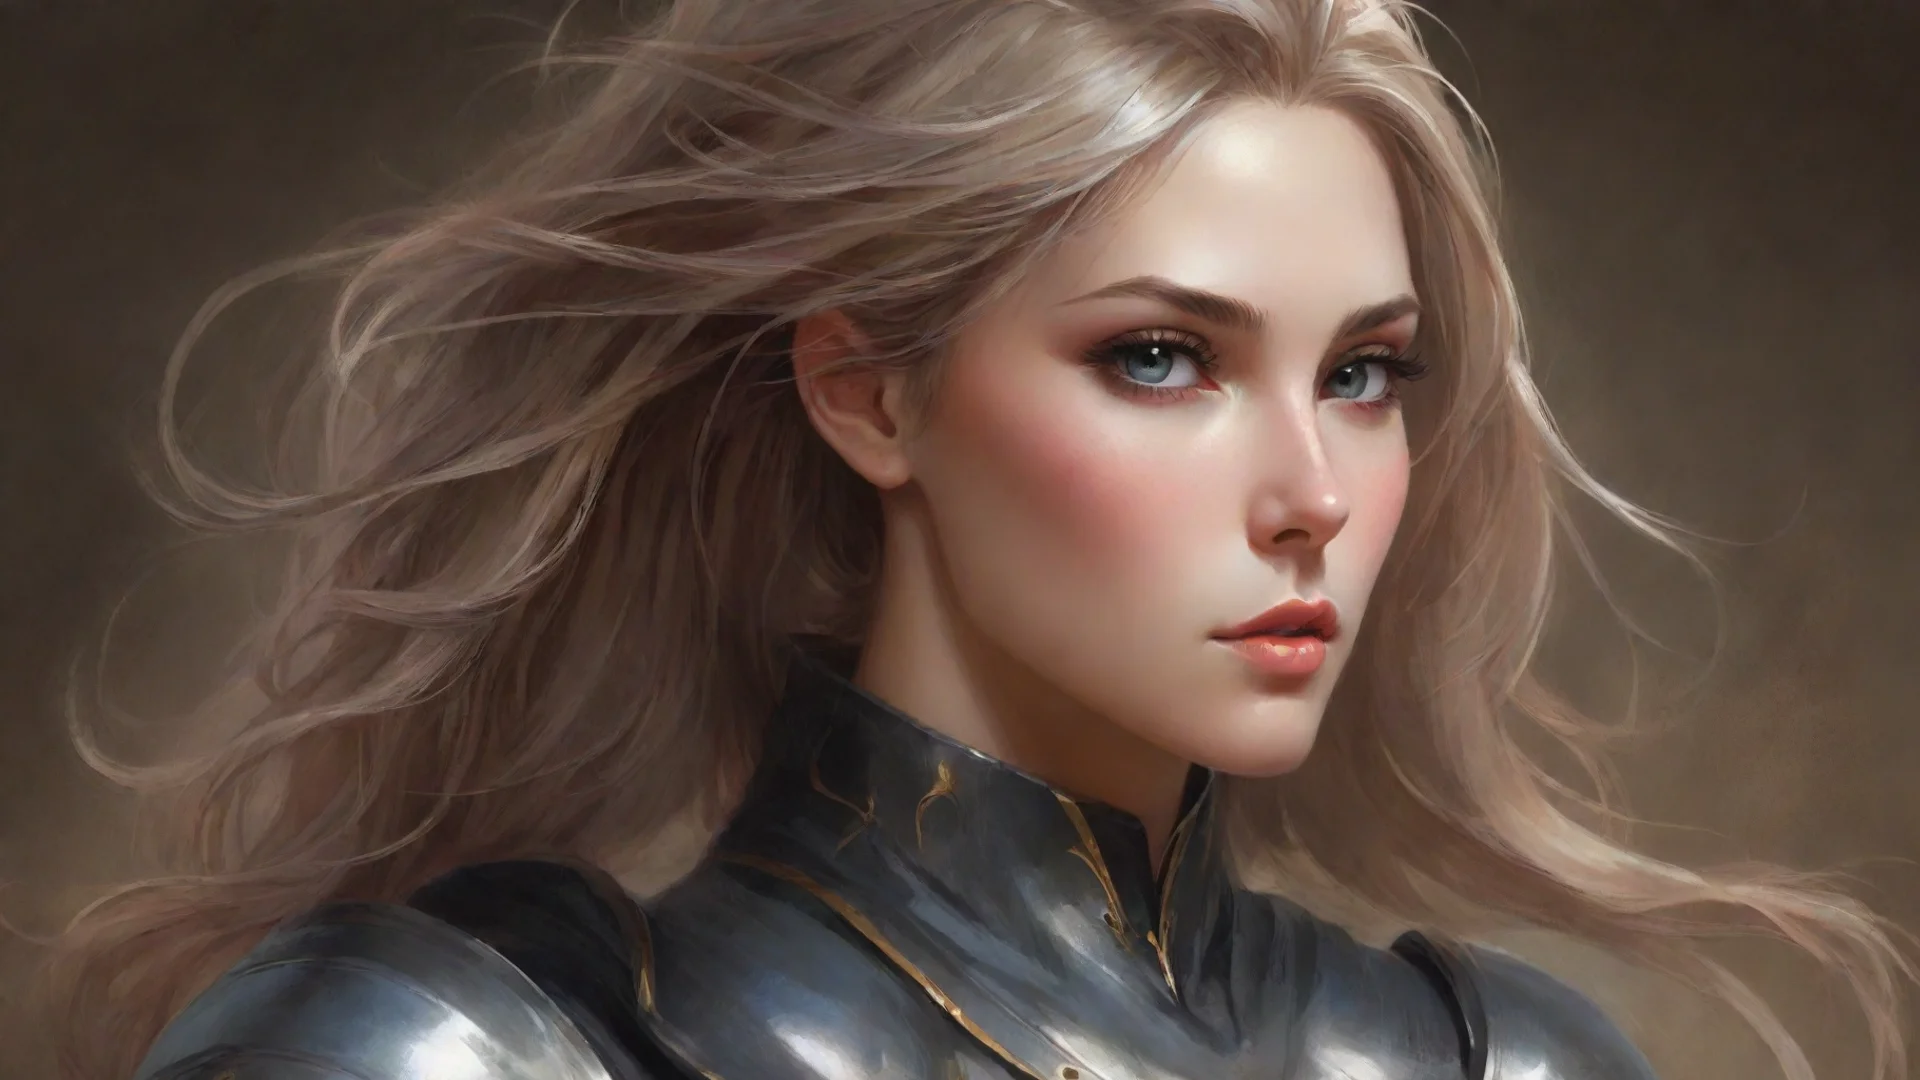 aiartstation art stunning portrait illustration beautiful androgynous wizard knight by ross tran by charlie bowater illustration highly d confident engaging wow 3 wide